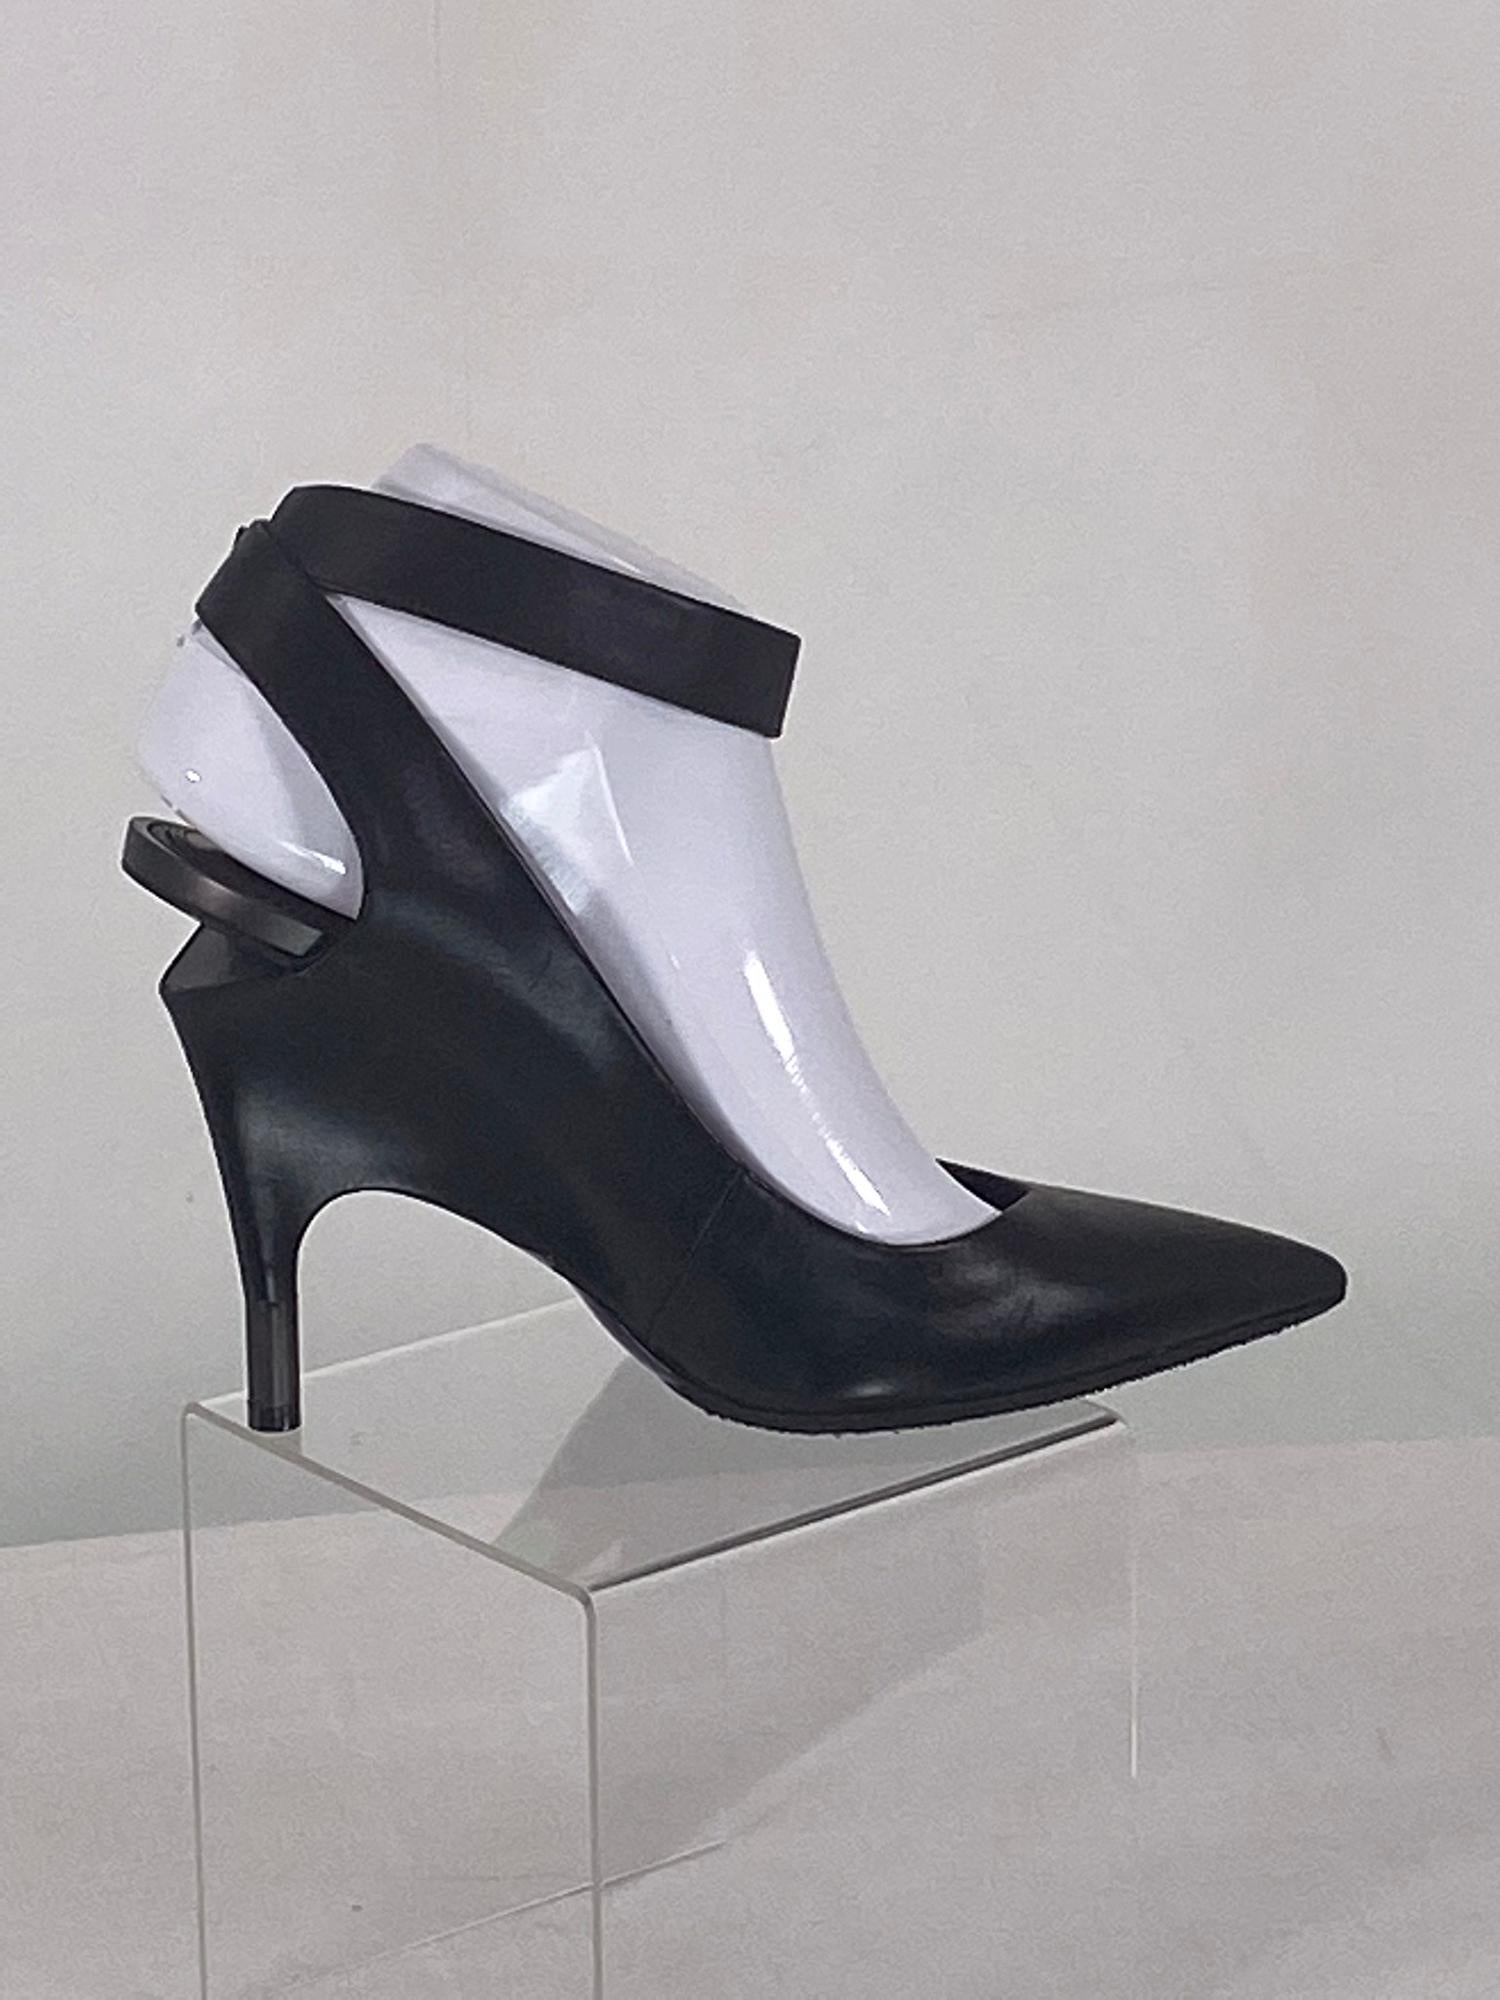 Tom Ford black calf, wedge heel, ankle strap, high heels 39. In excellent condition together with original box, protector bags & replacement caps. They look barely, if ever worn. 39/8 1/2. Non slip soles at the bottom front have been professionally